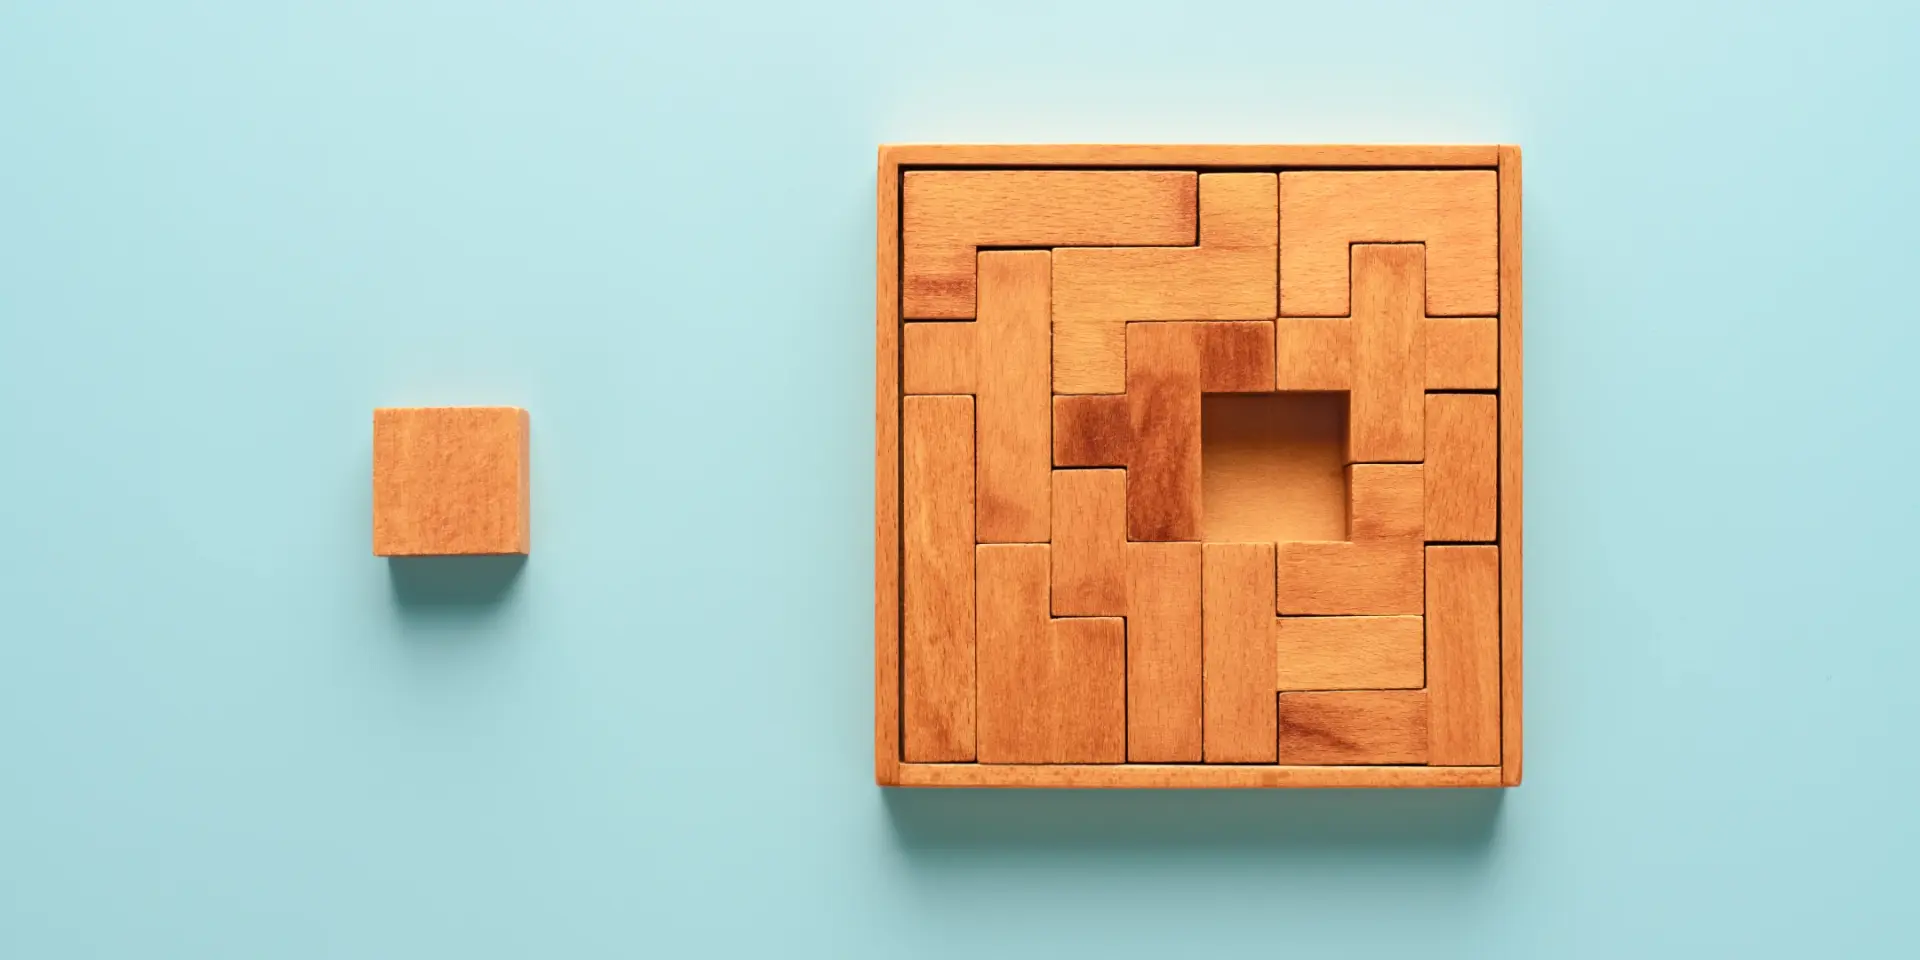 an image of a wooden building block puzzle with one piece outside of the puzzle